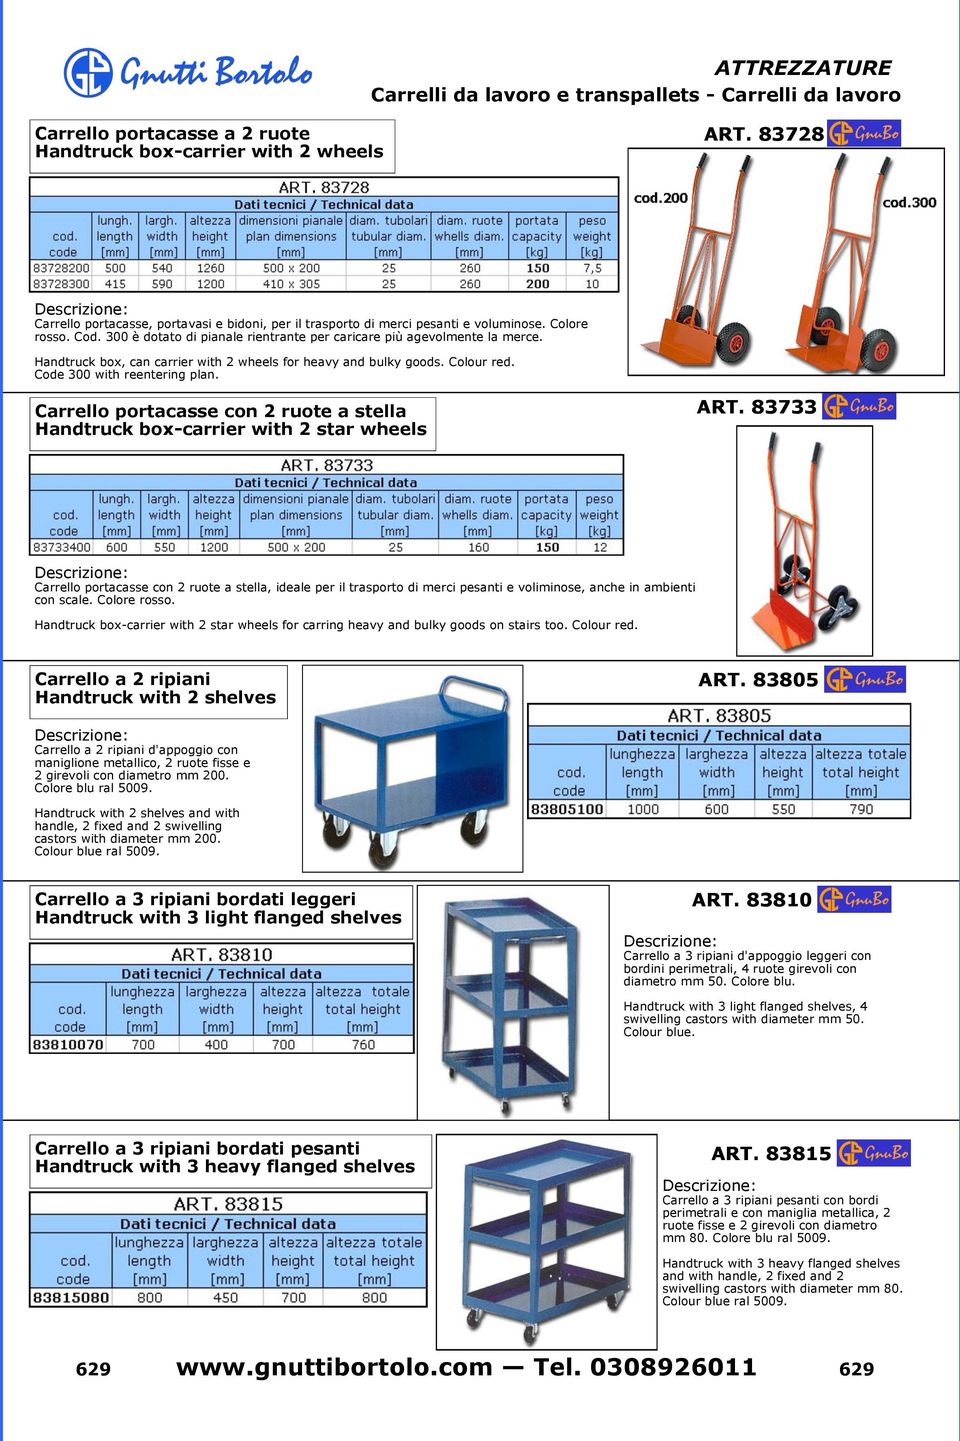 Handtruck box, can carrier with 2 wheels for heavy and bulky goods. Colour red. Code 300 with reentering plan. Carrello portacasse con 2 ruote a stella Handtruck box-carrier with 2 star wheels ART.